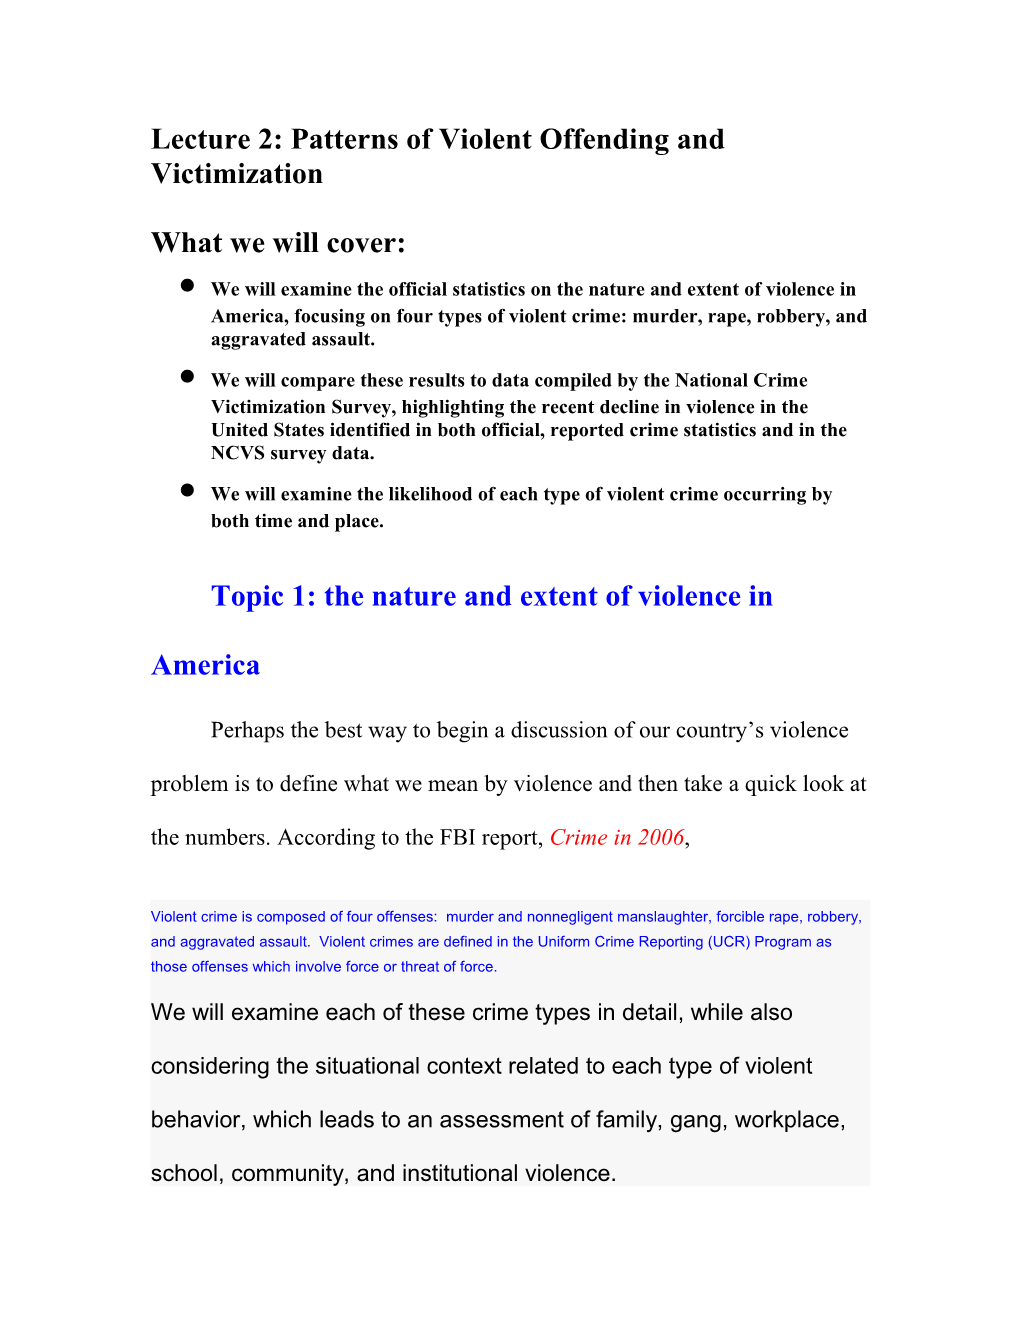 Lecture 2: Patterns of Violent Offending and Victimization